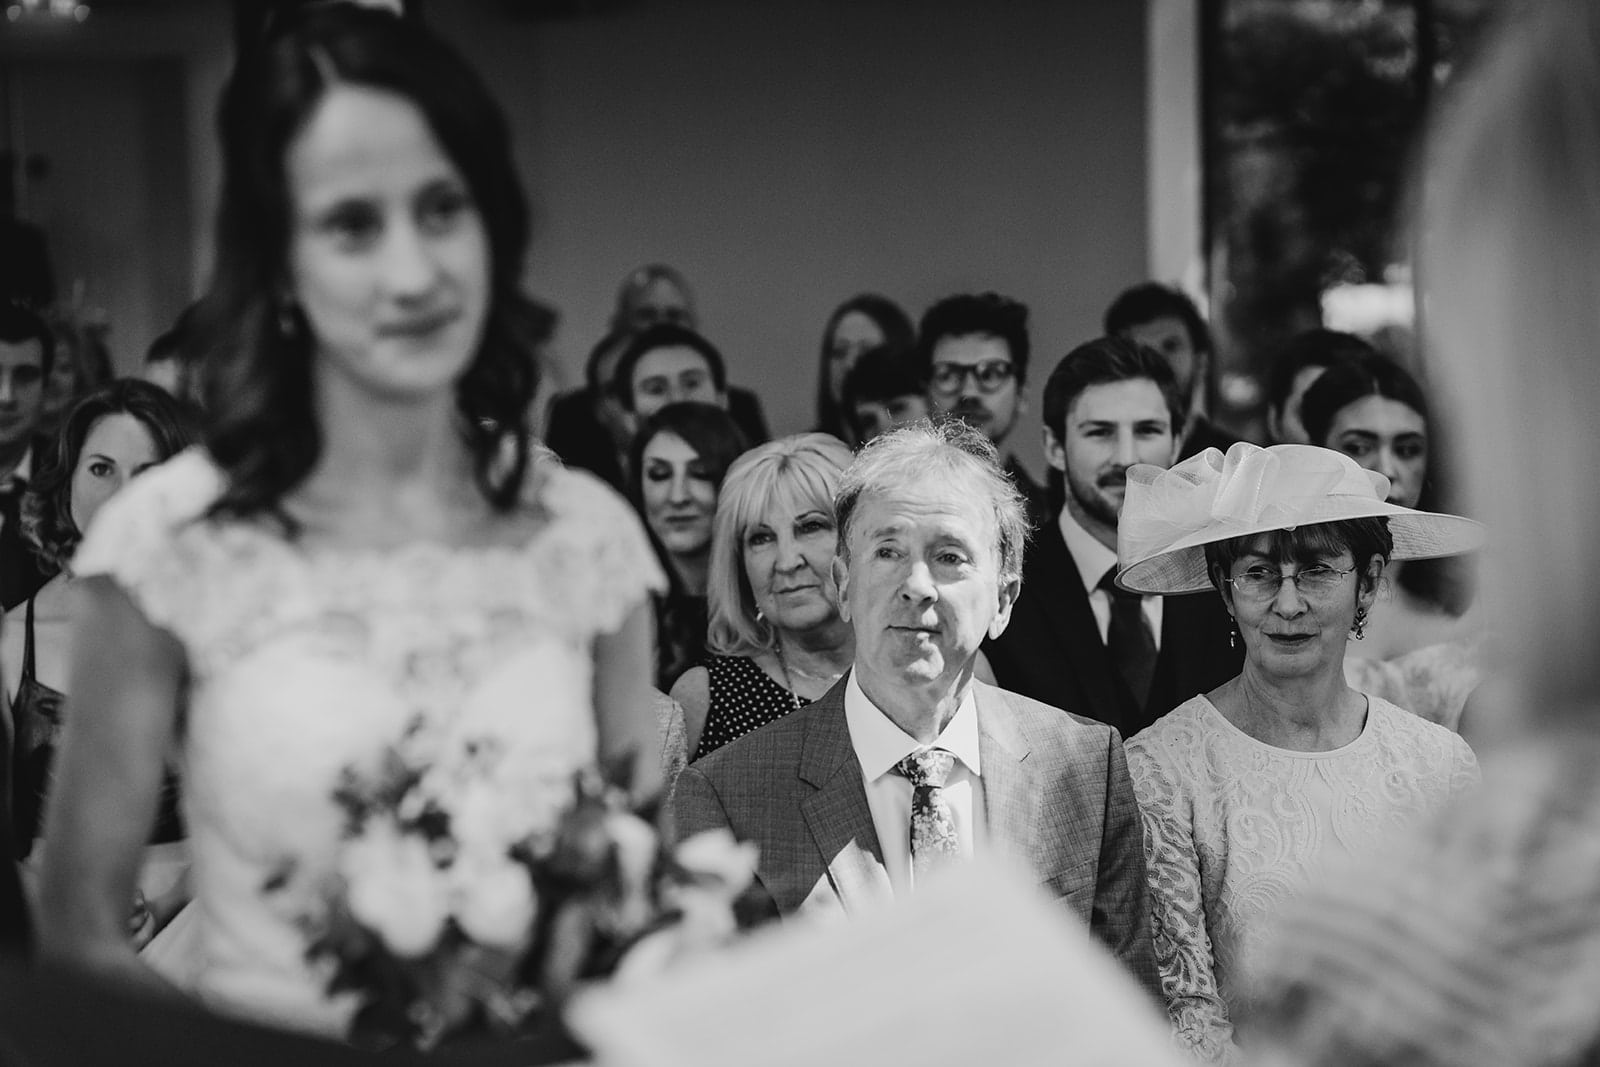 Mum and Dad look on as daughter gets married